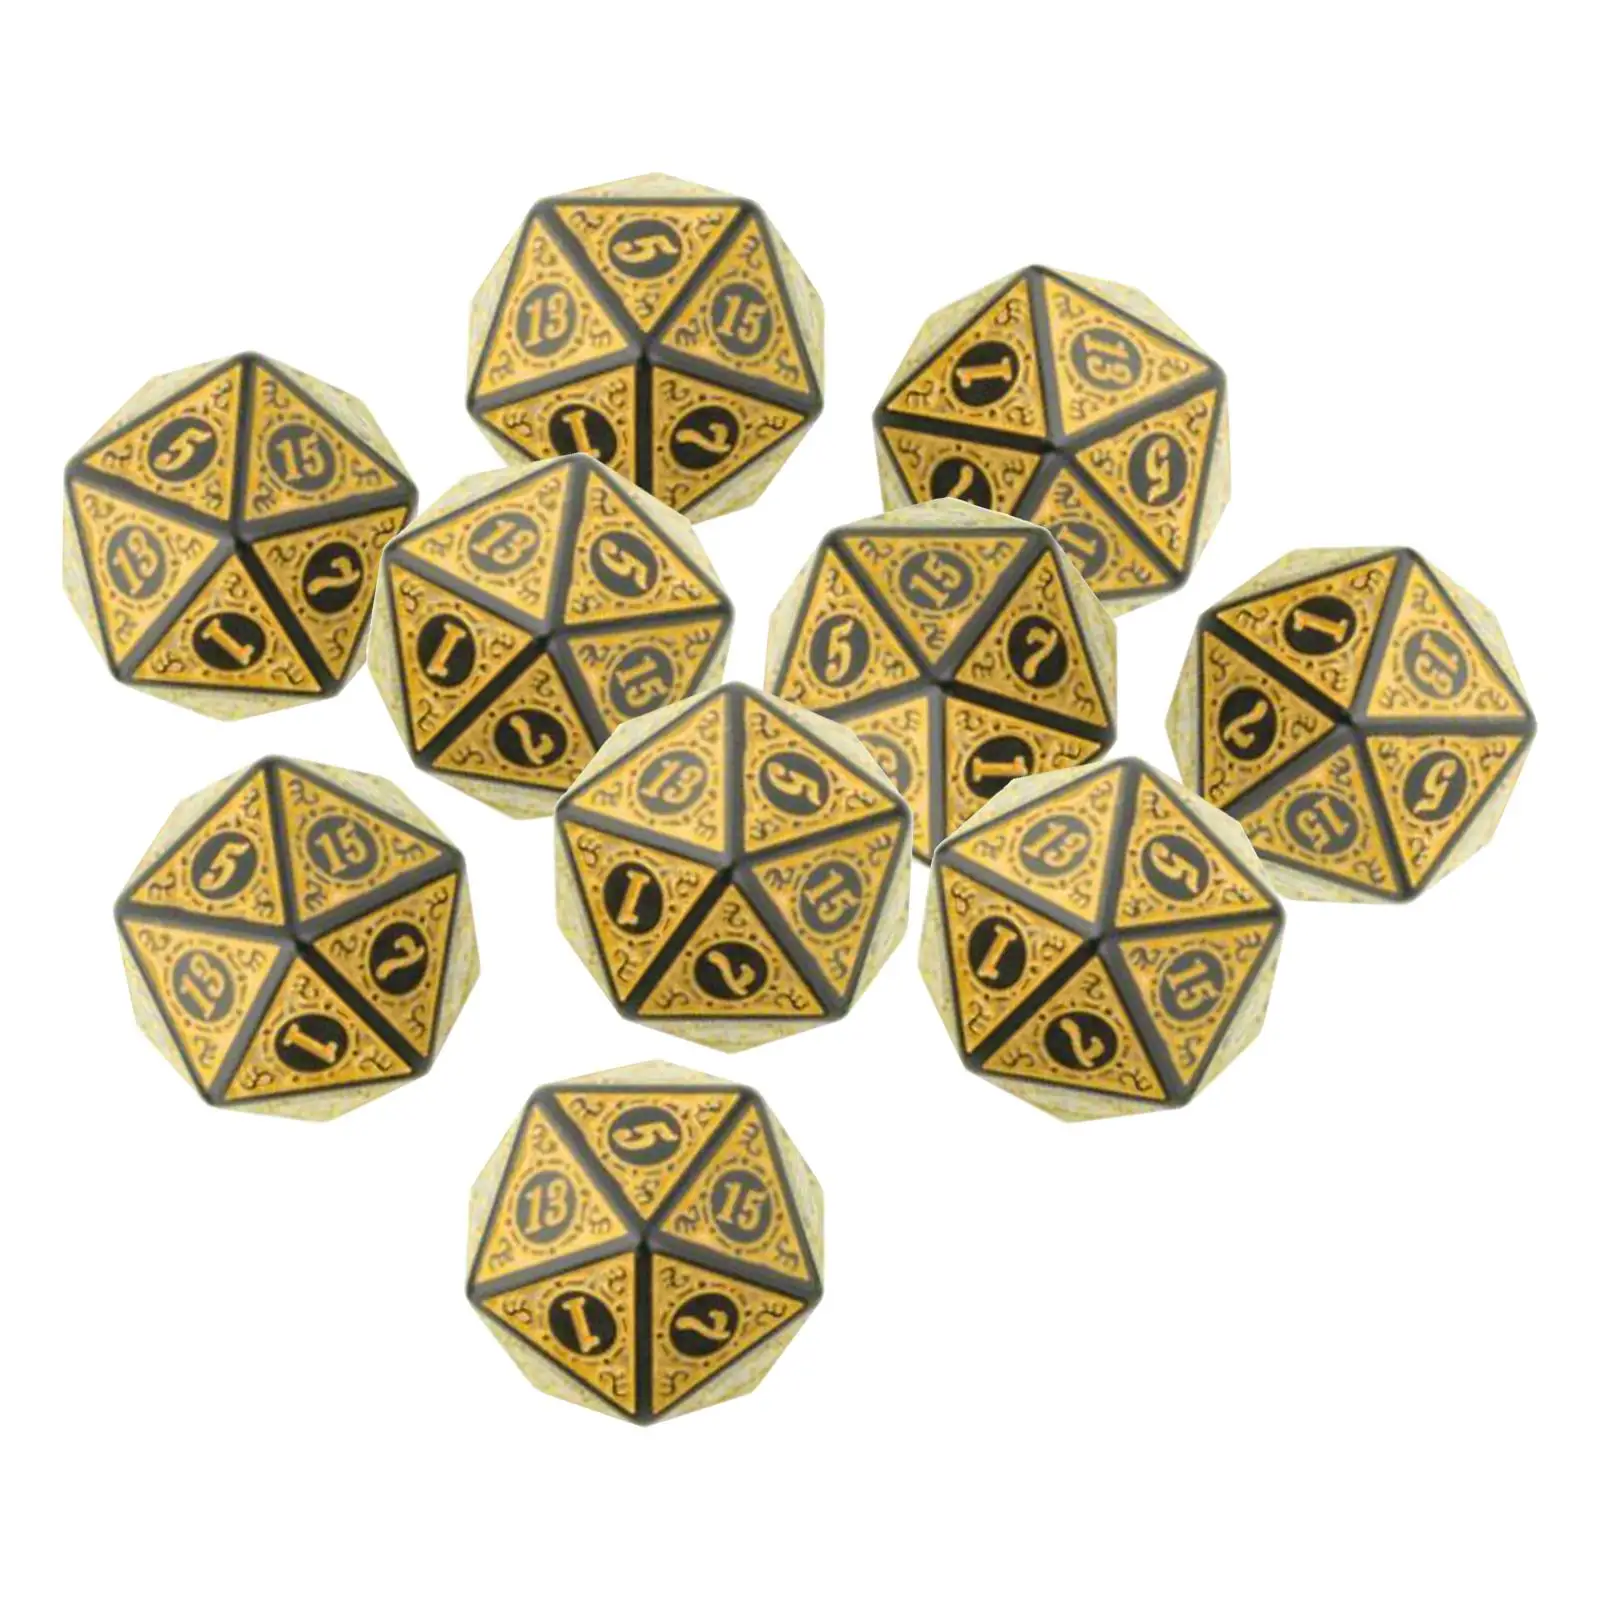 Polyhedral Dice Set of 10 Accessories Wear Resistant Lightweight for DND RPG